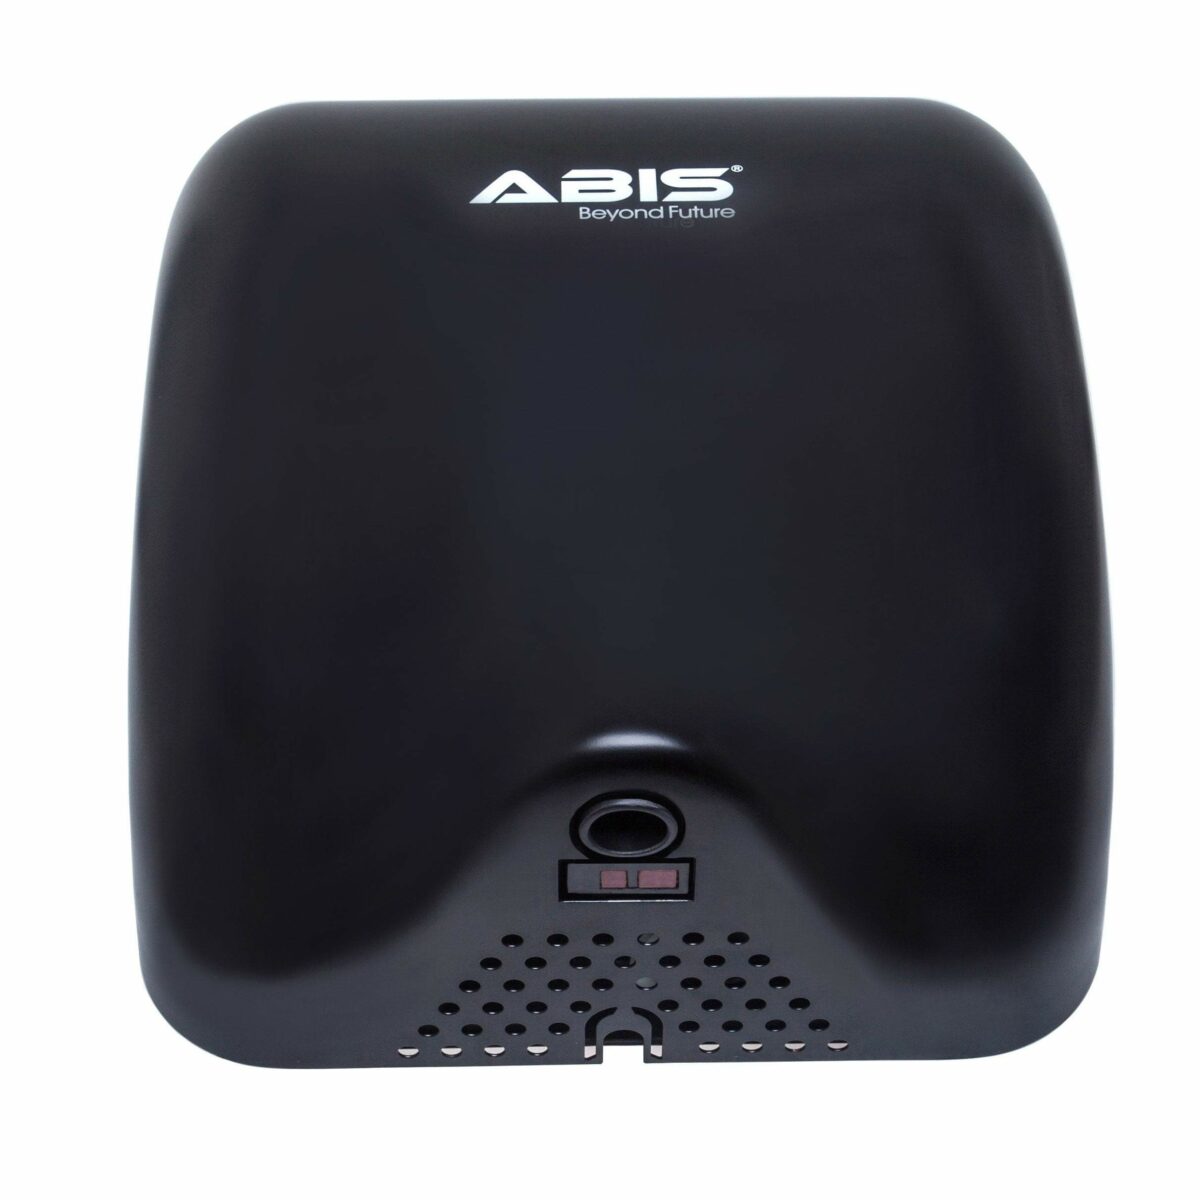 Excel-9 Stainless Steel Commercial Hand Dryer - Black - ABIS